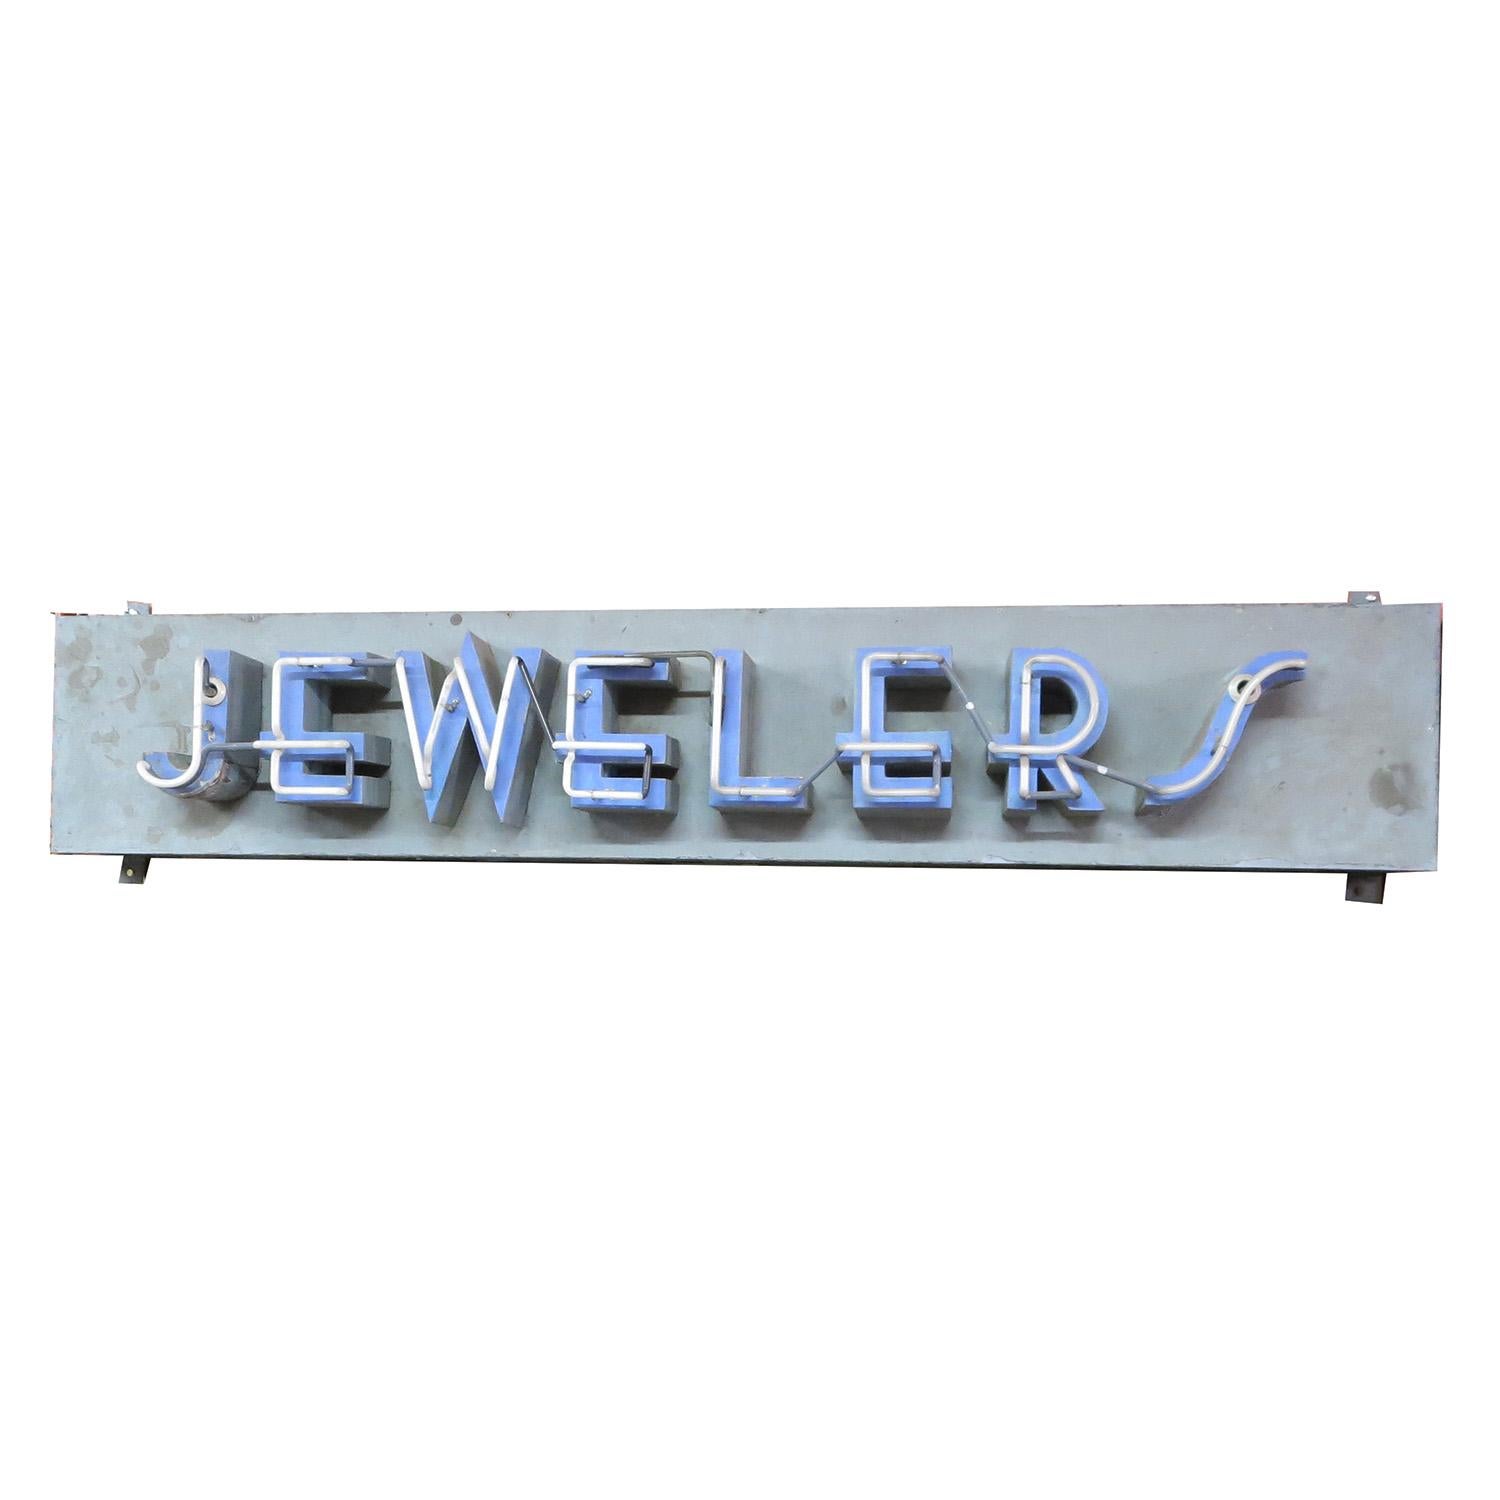 This great old sign once hung over the doorway of a jewelry store in the 1930s. The raised metal lettering is super stylized, and trimmed in blue neon. The painted metal can is original, and shows a charmed fading to the paint. The sign is self